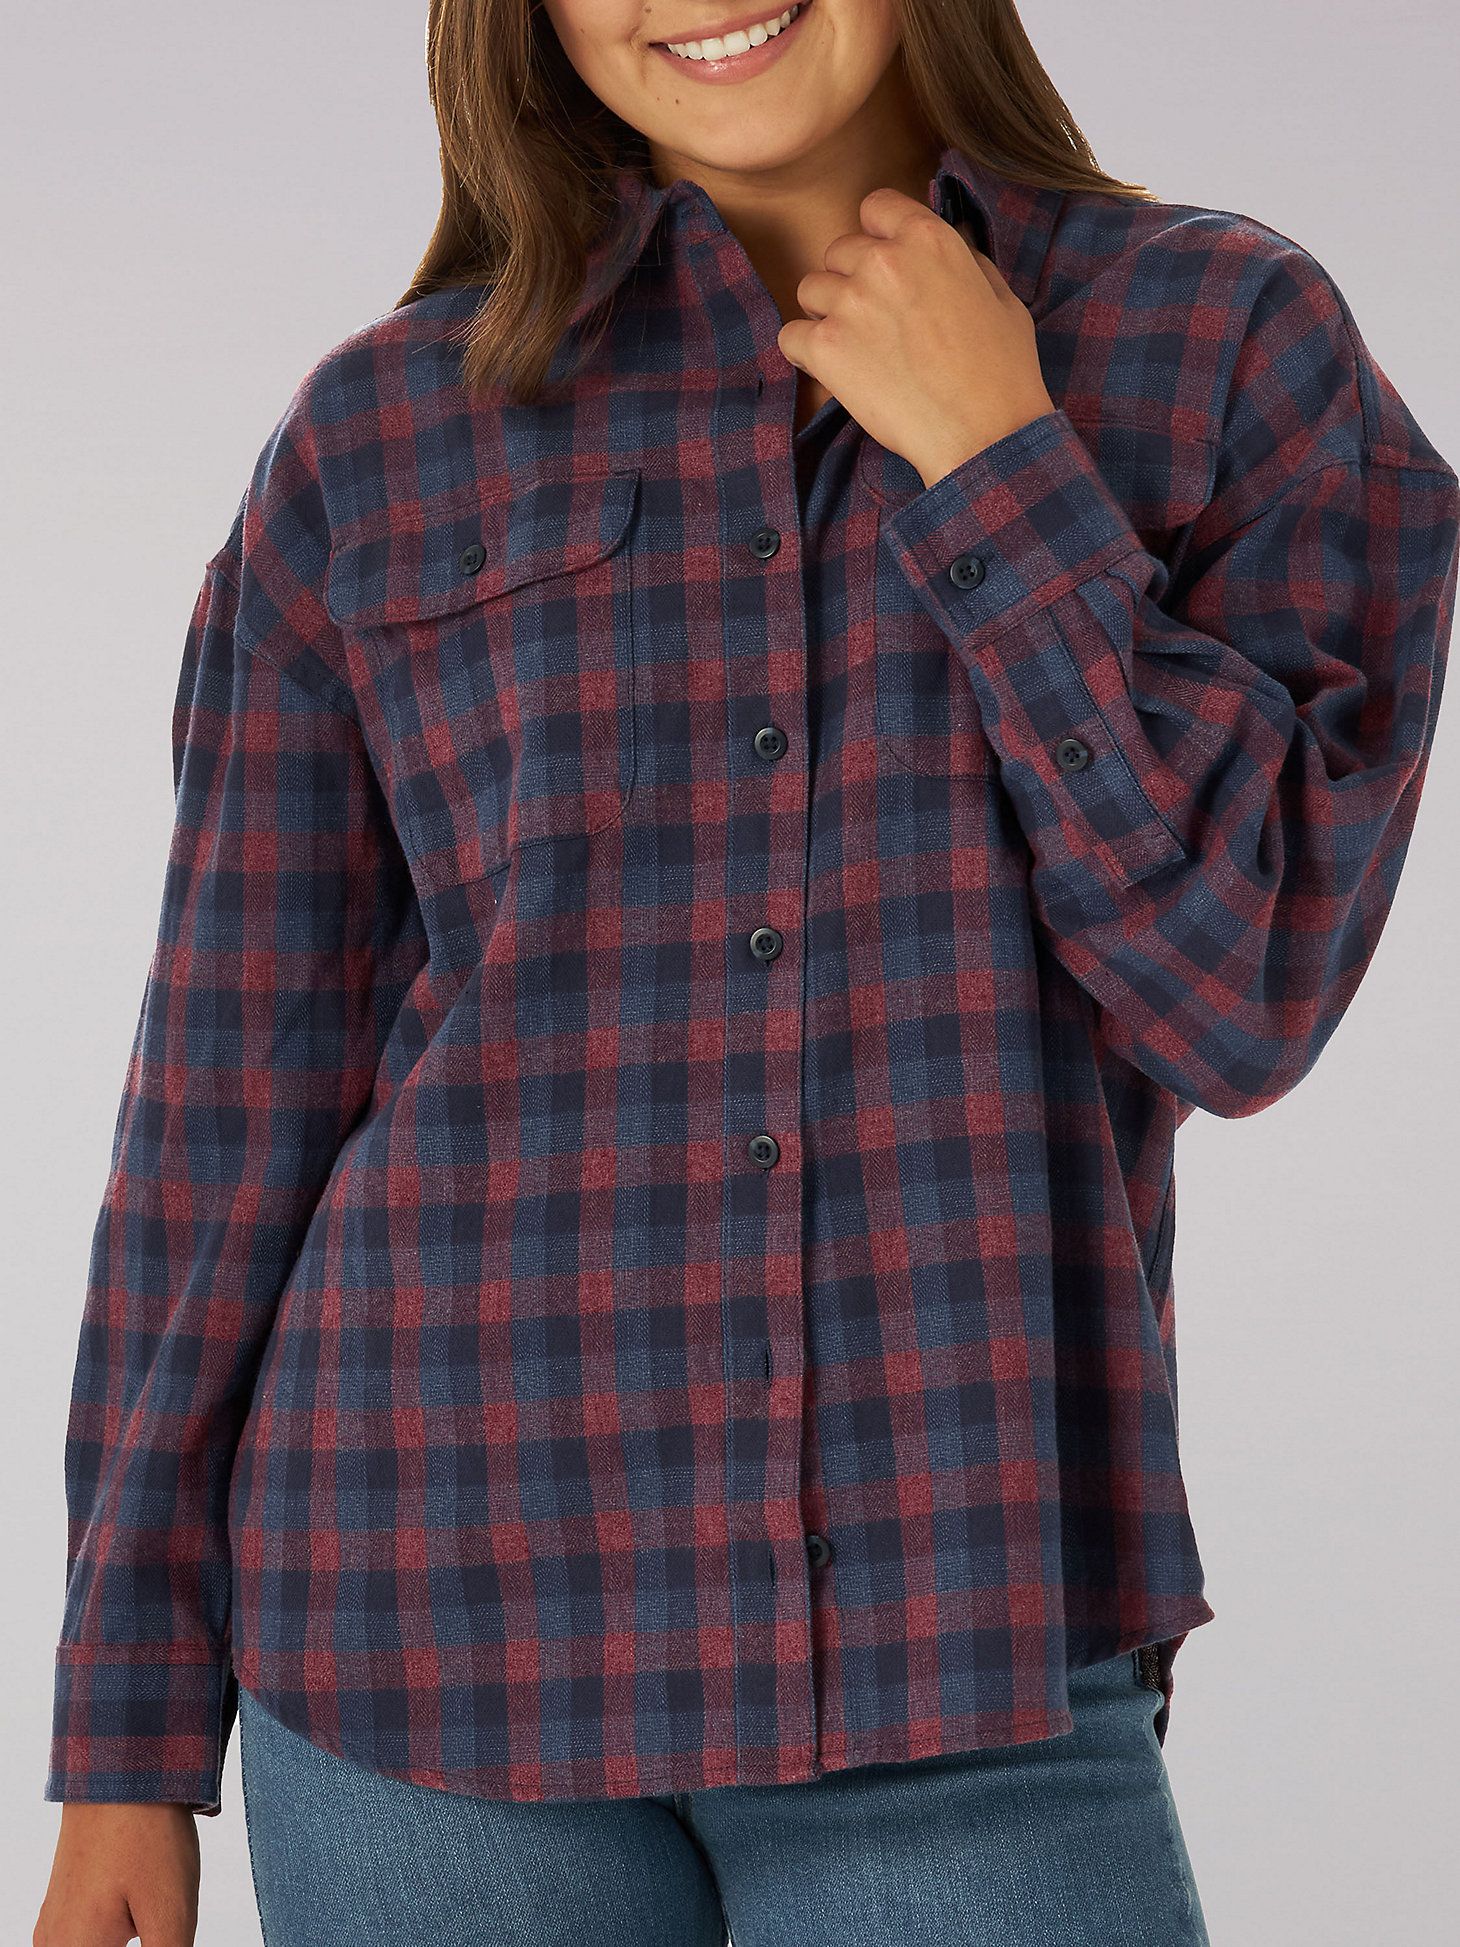 Women's Heritage Frontier Gingham Button Down Shirt in Weldon Gingham main view